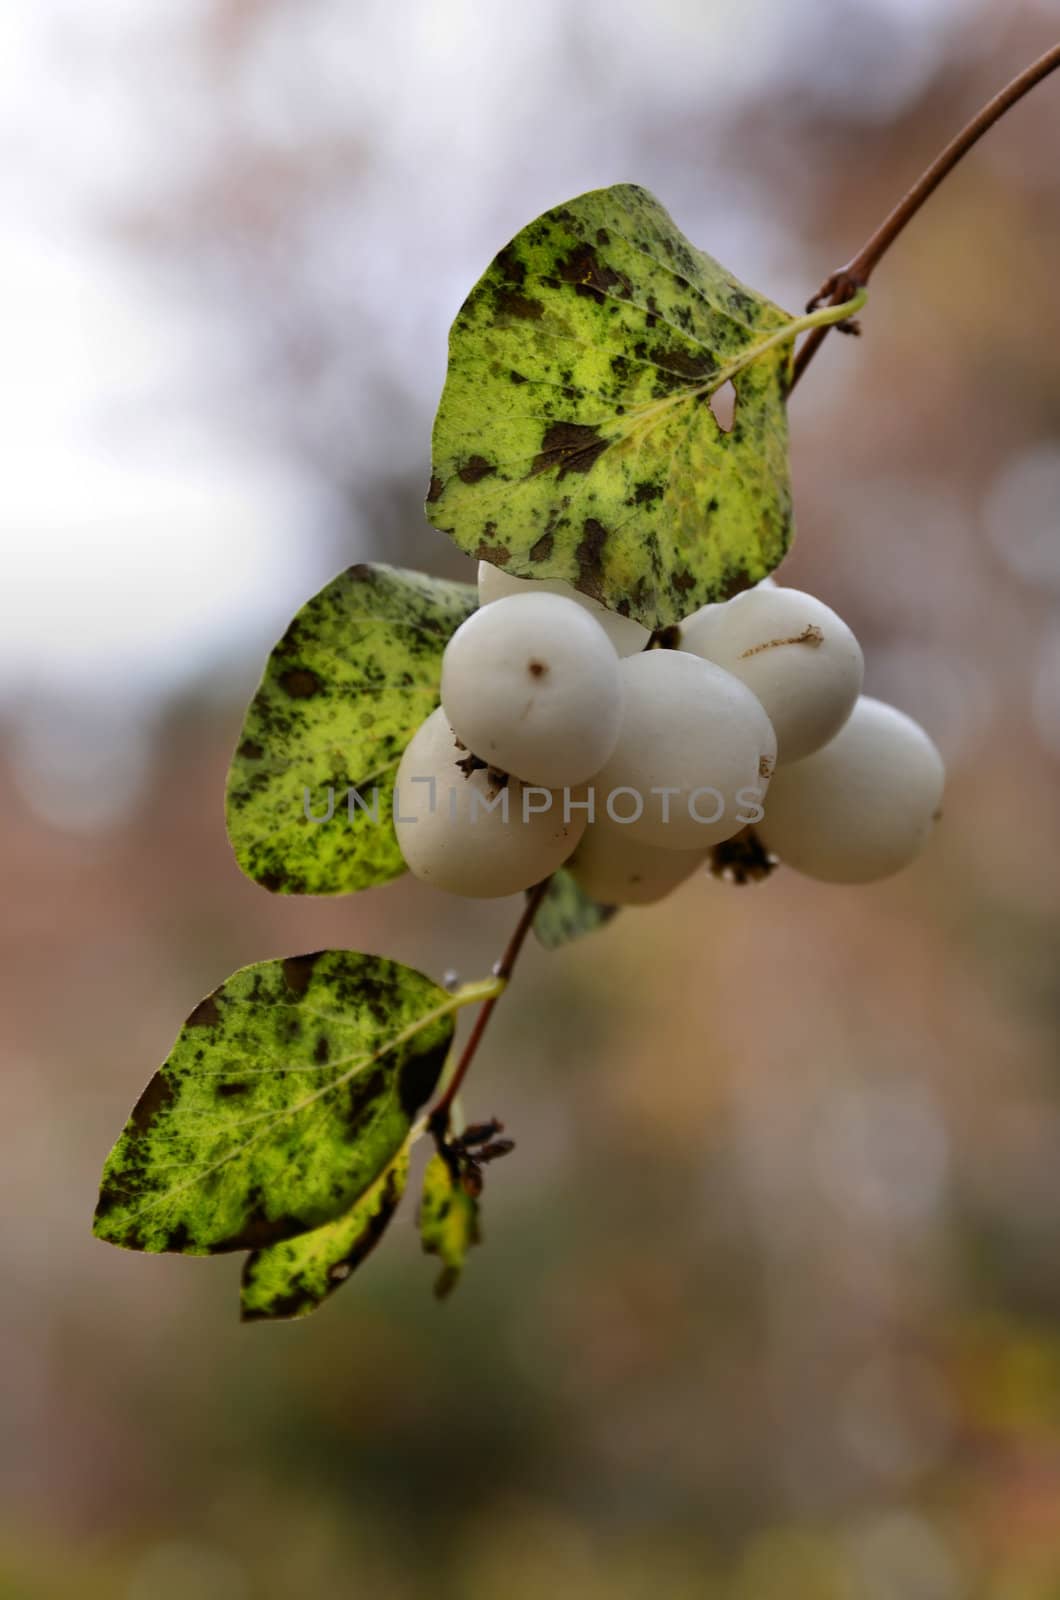 The photo shows a common Snowberry growing on the vine in a blurred background.